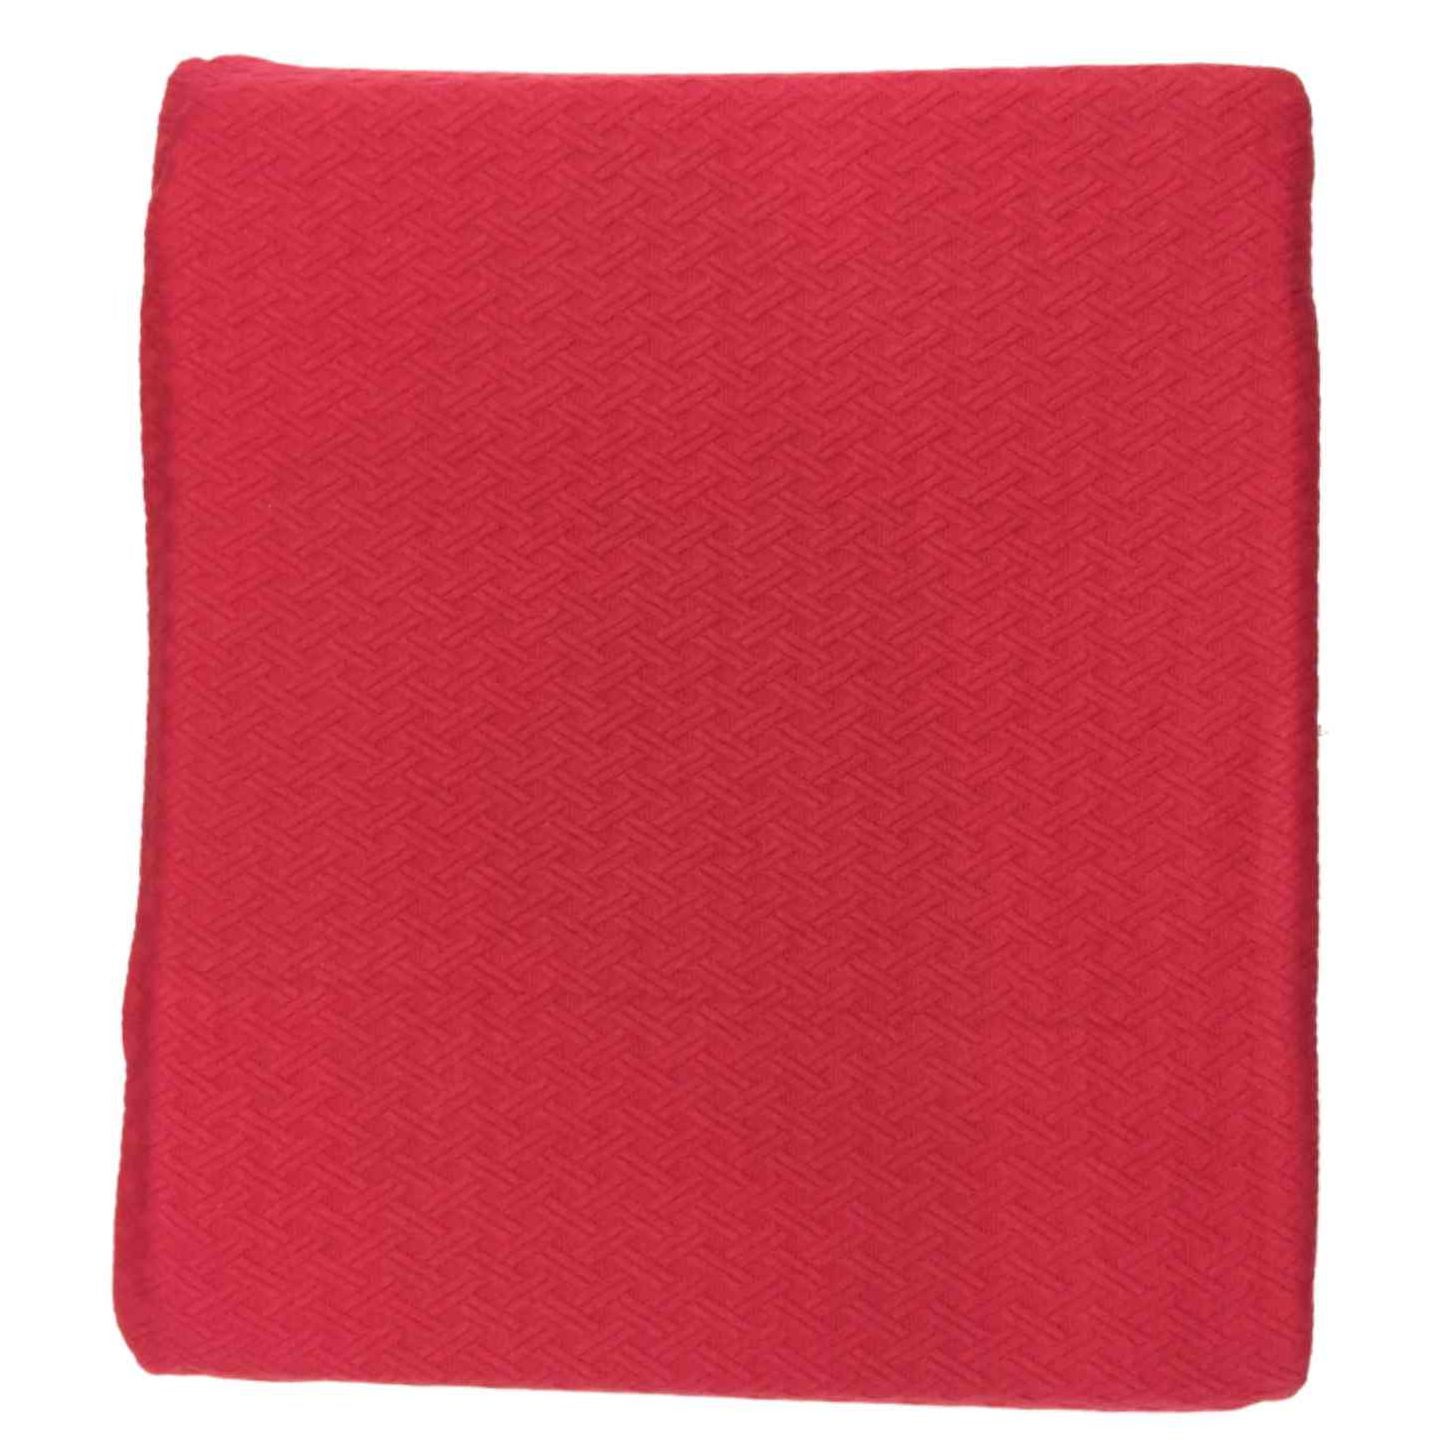 Chaps Home Matelasse King Cotton Bedspread Emma Red Bed Cover